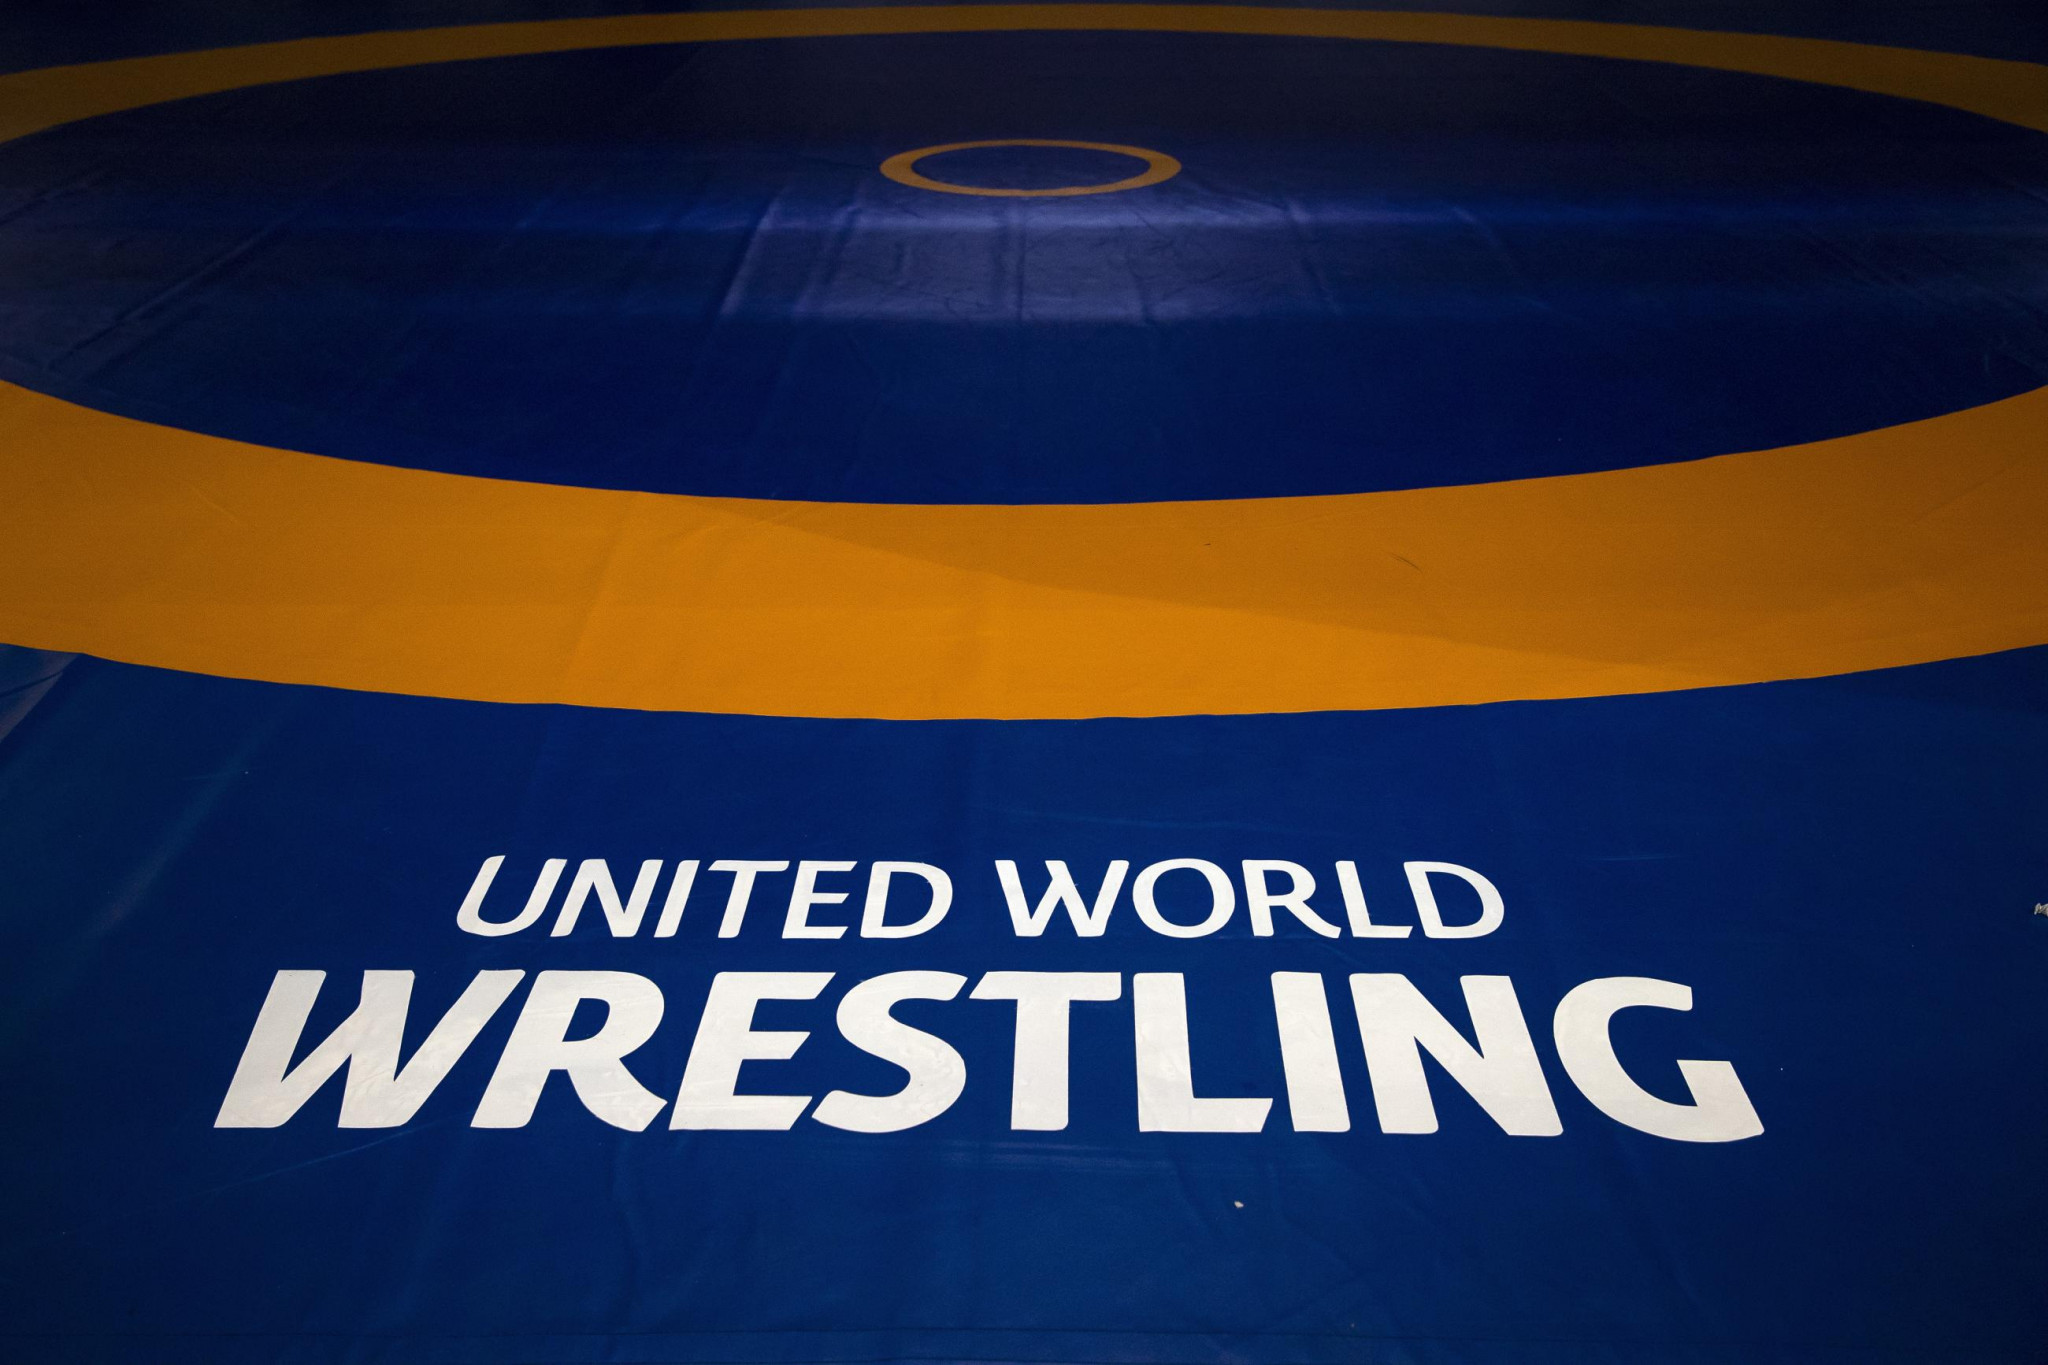  Nine Russian wrestlers given two-year doping bans based on 2012 Moscow data